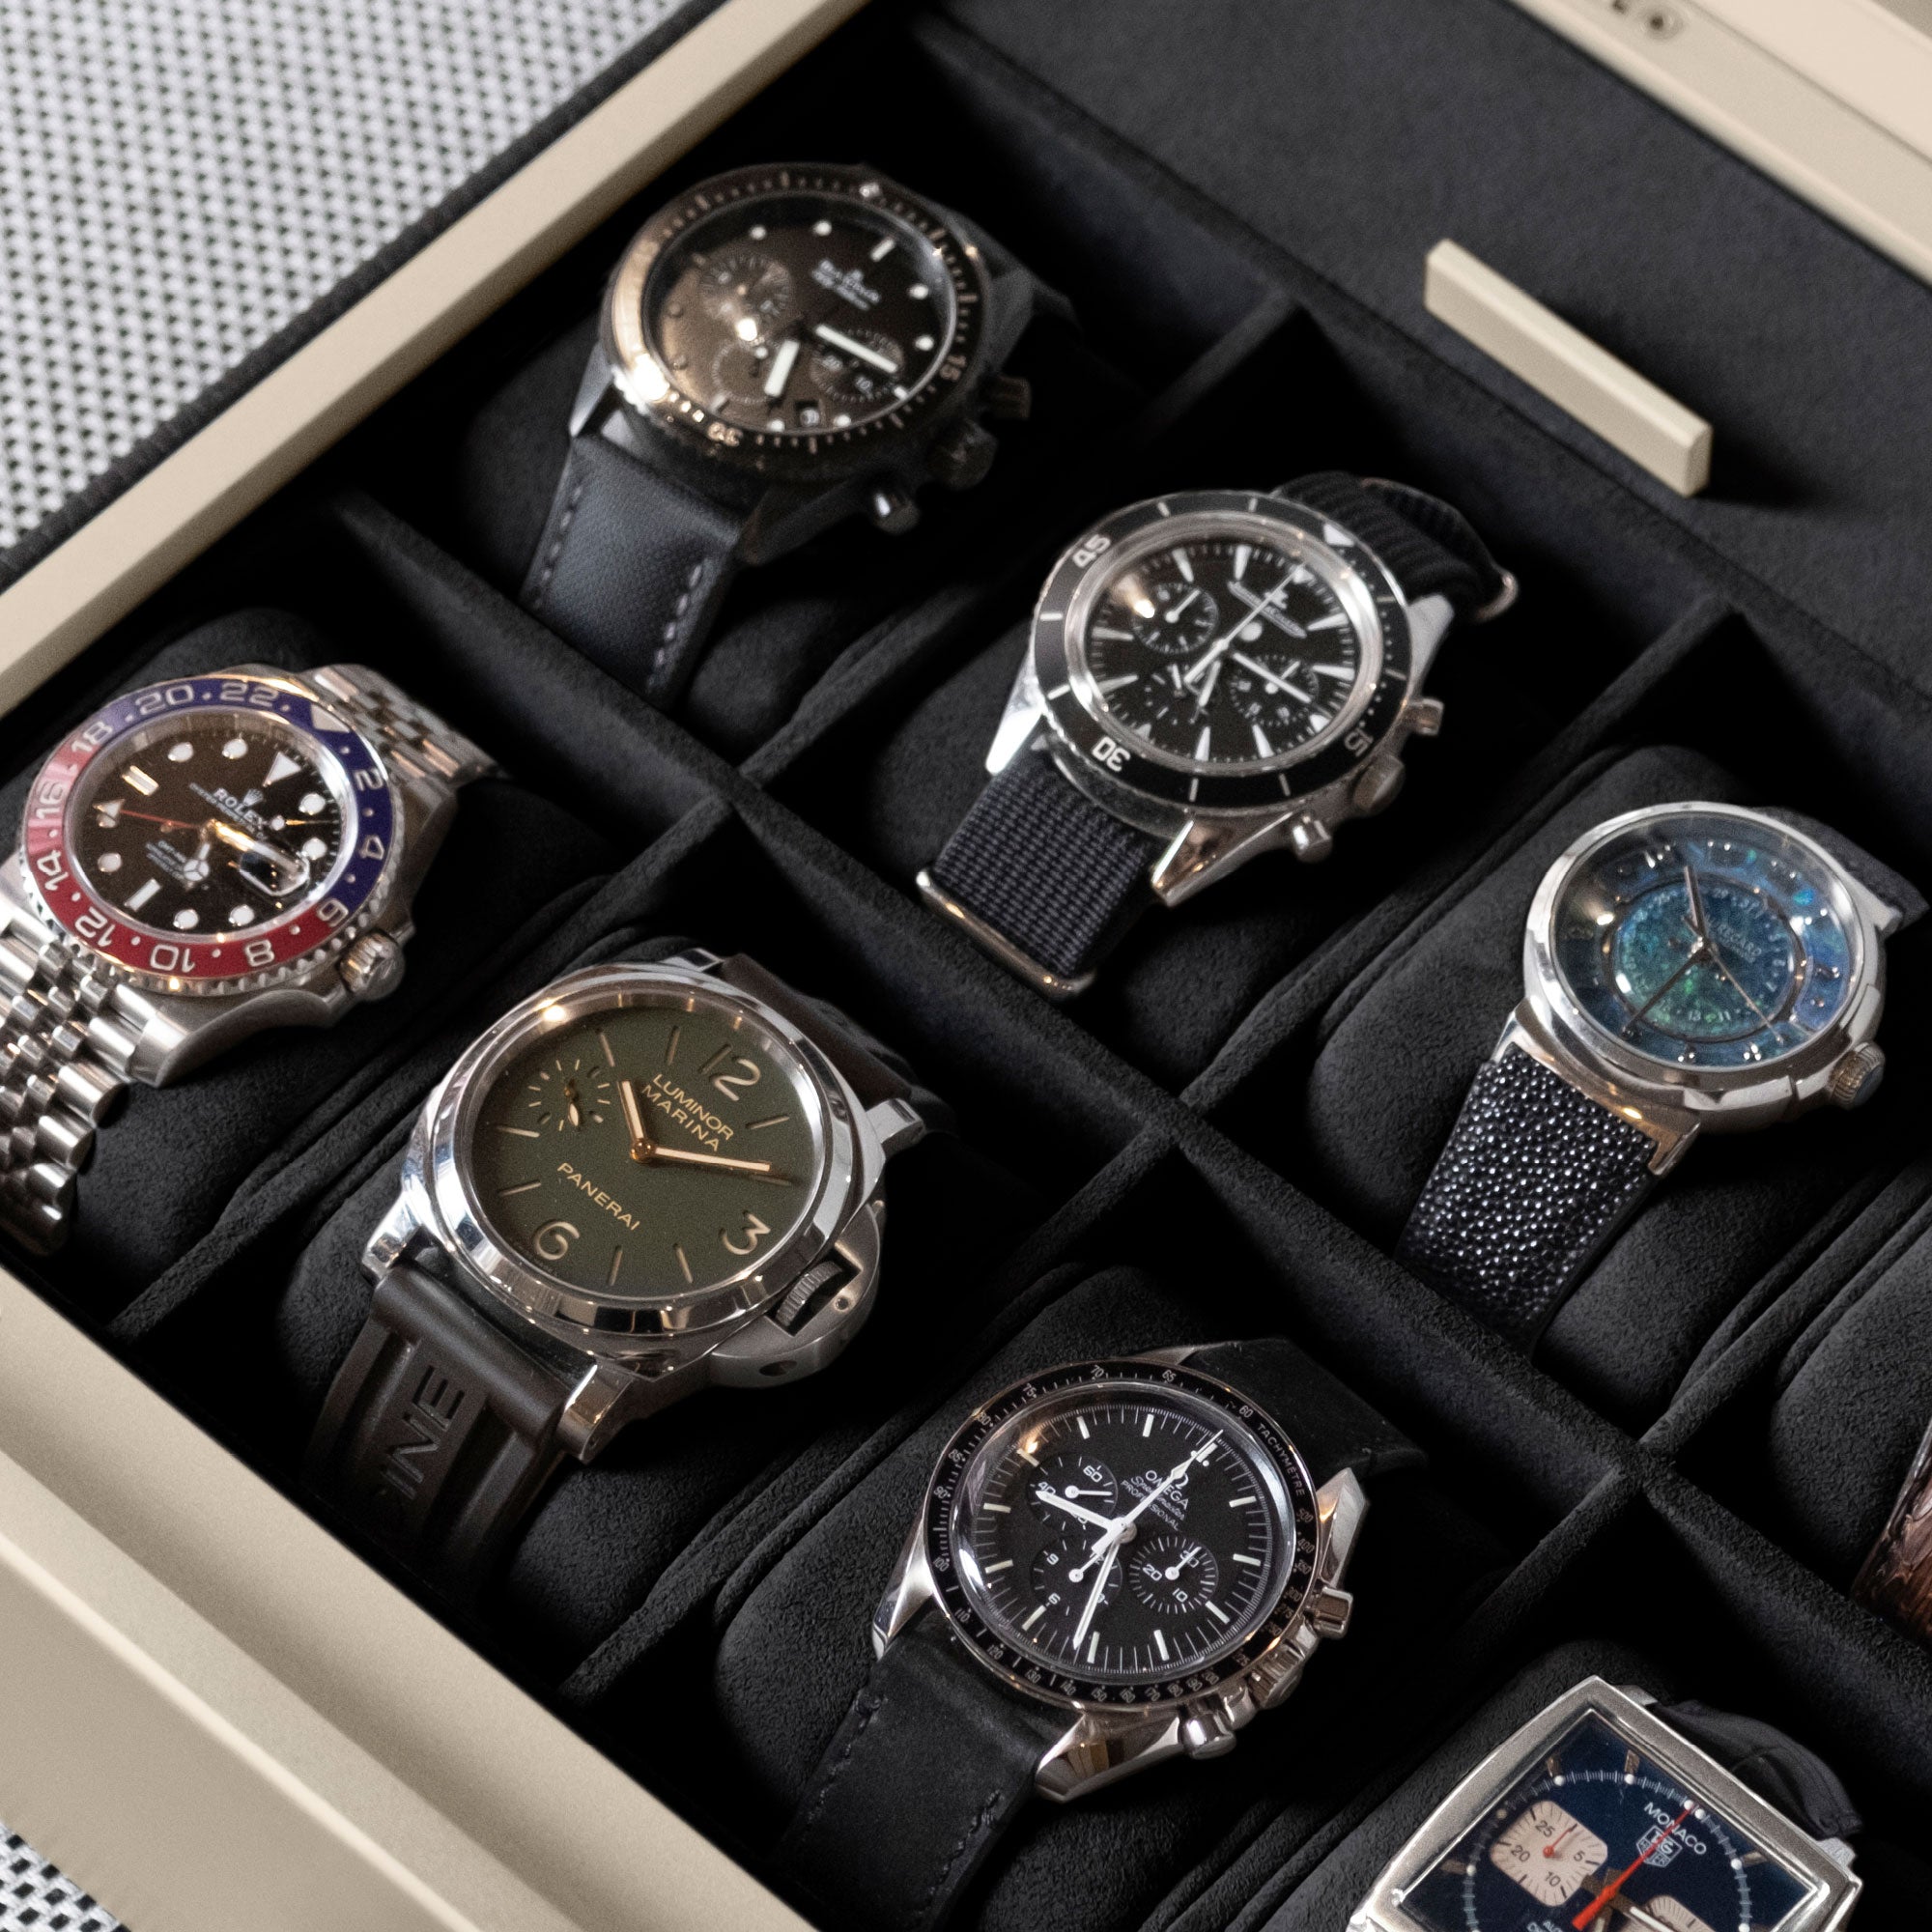 Detail photo of luxury watches displayed in the Spence 12 Watch box in black leather and gold aluminum